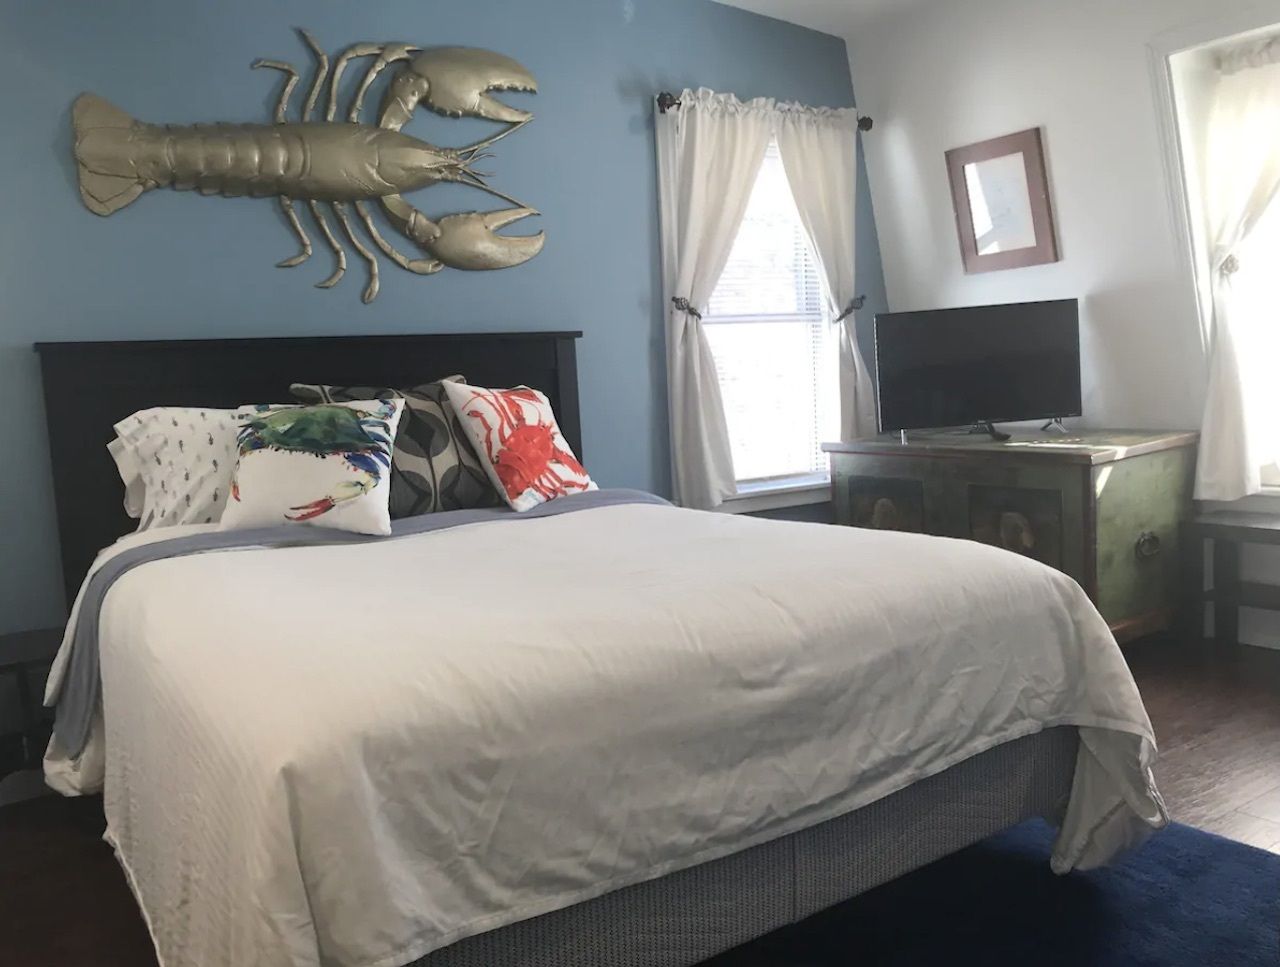 A blue, nautical-themed Airbnb in South Boston